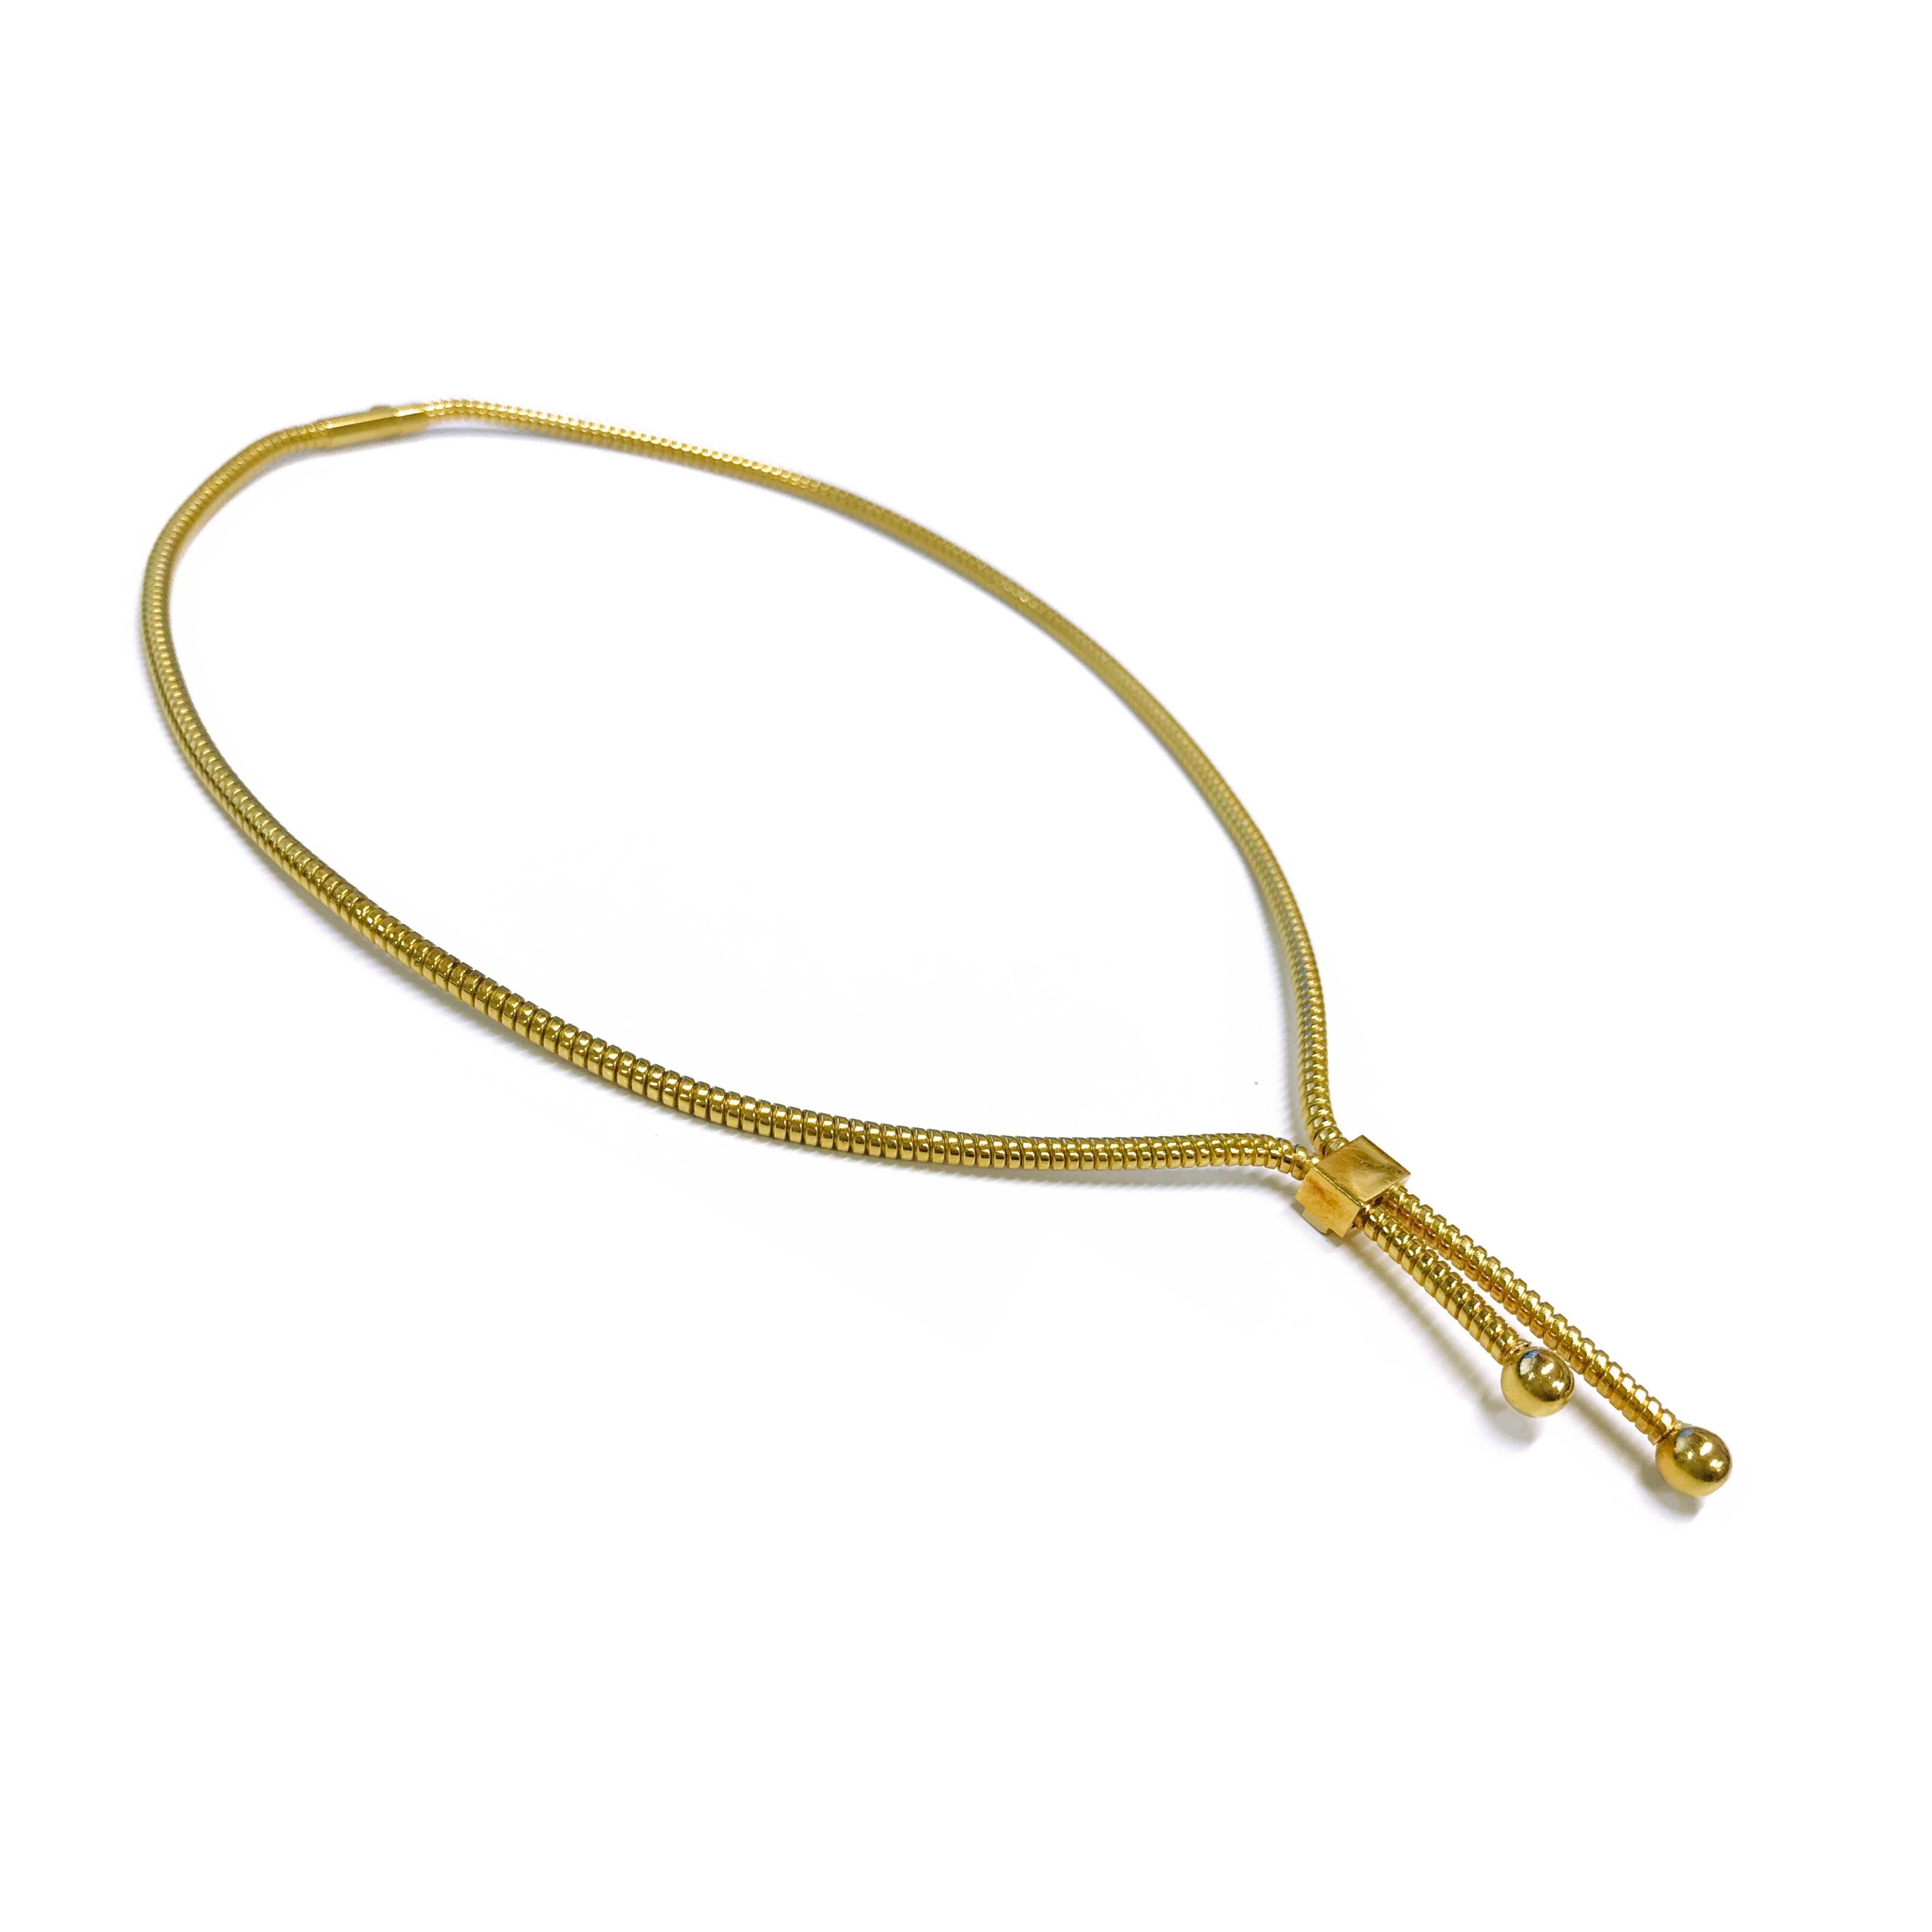 18 Karat Gold Bolo-Style Necklace. The width of the necklace is 2.9mm. The total gold weight of the necklace is 26.9 grams and the necklace is 16 inches long.